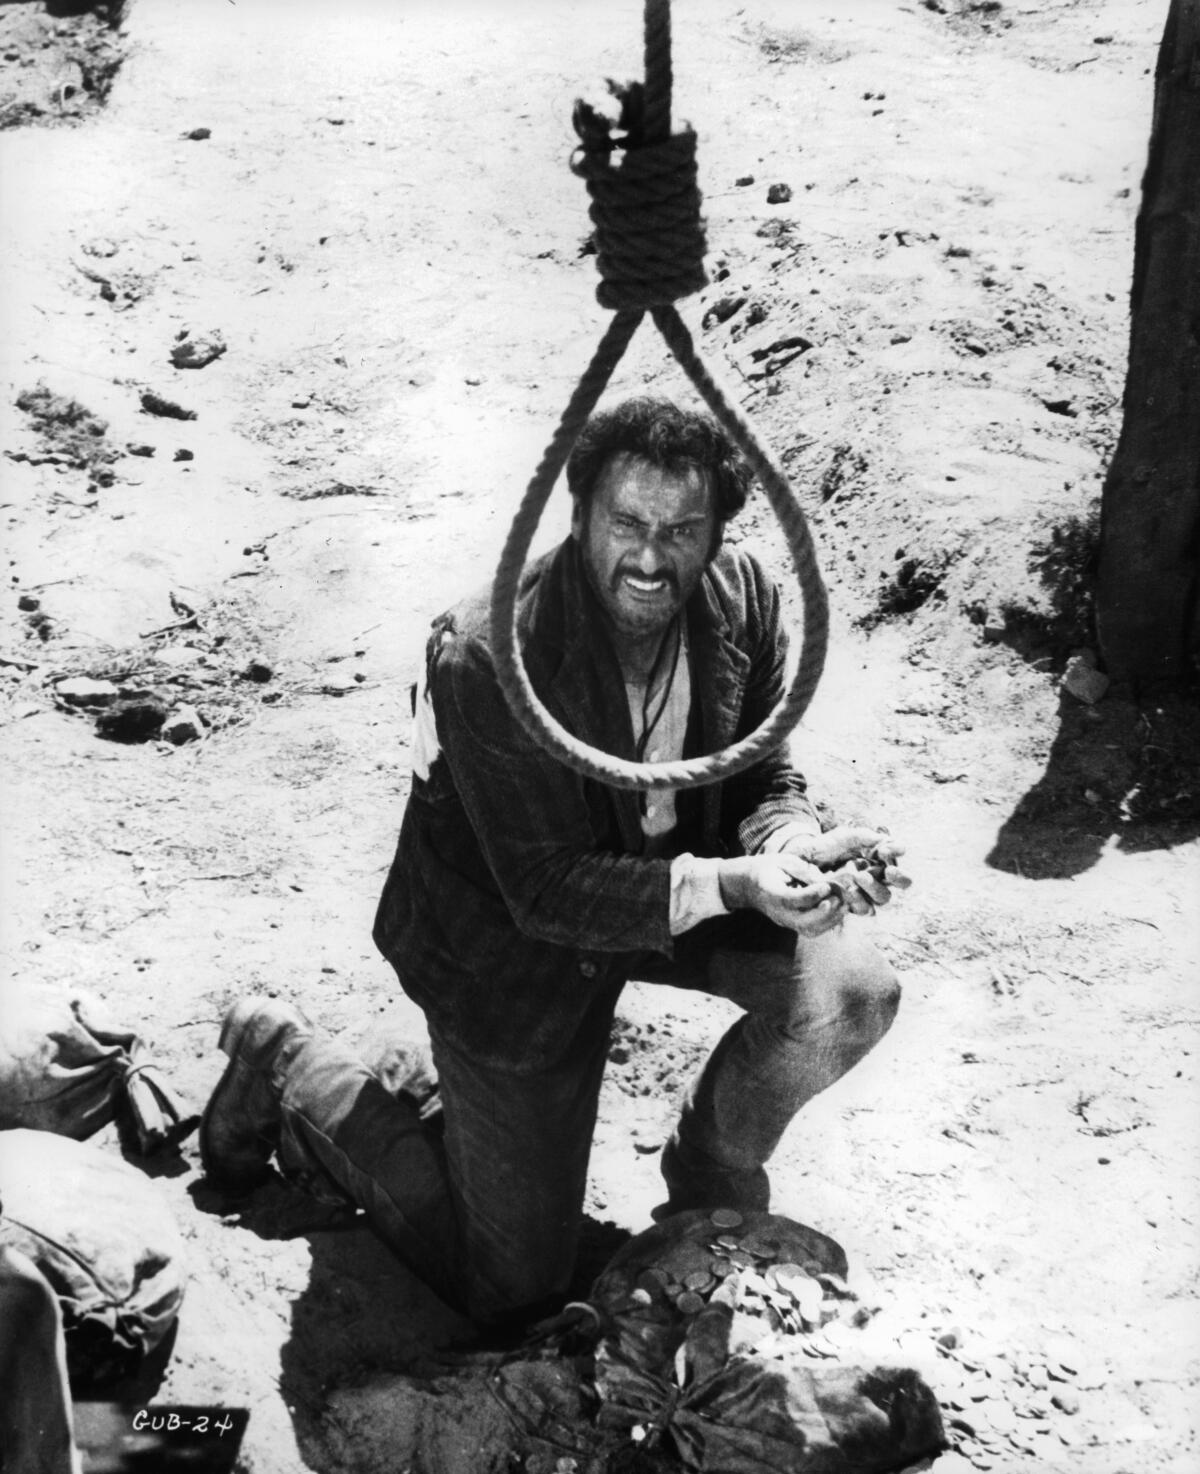 A cowboy kneels on the ground looking up at a noose, which frames his head in the shot from "The Good, the Bad and the Ugly."